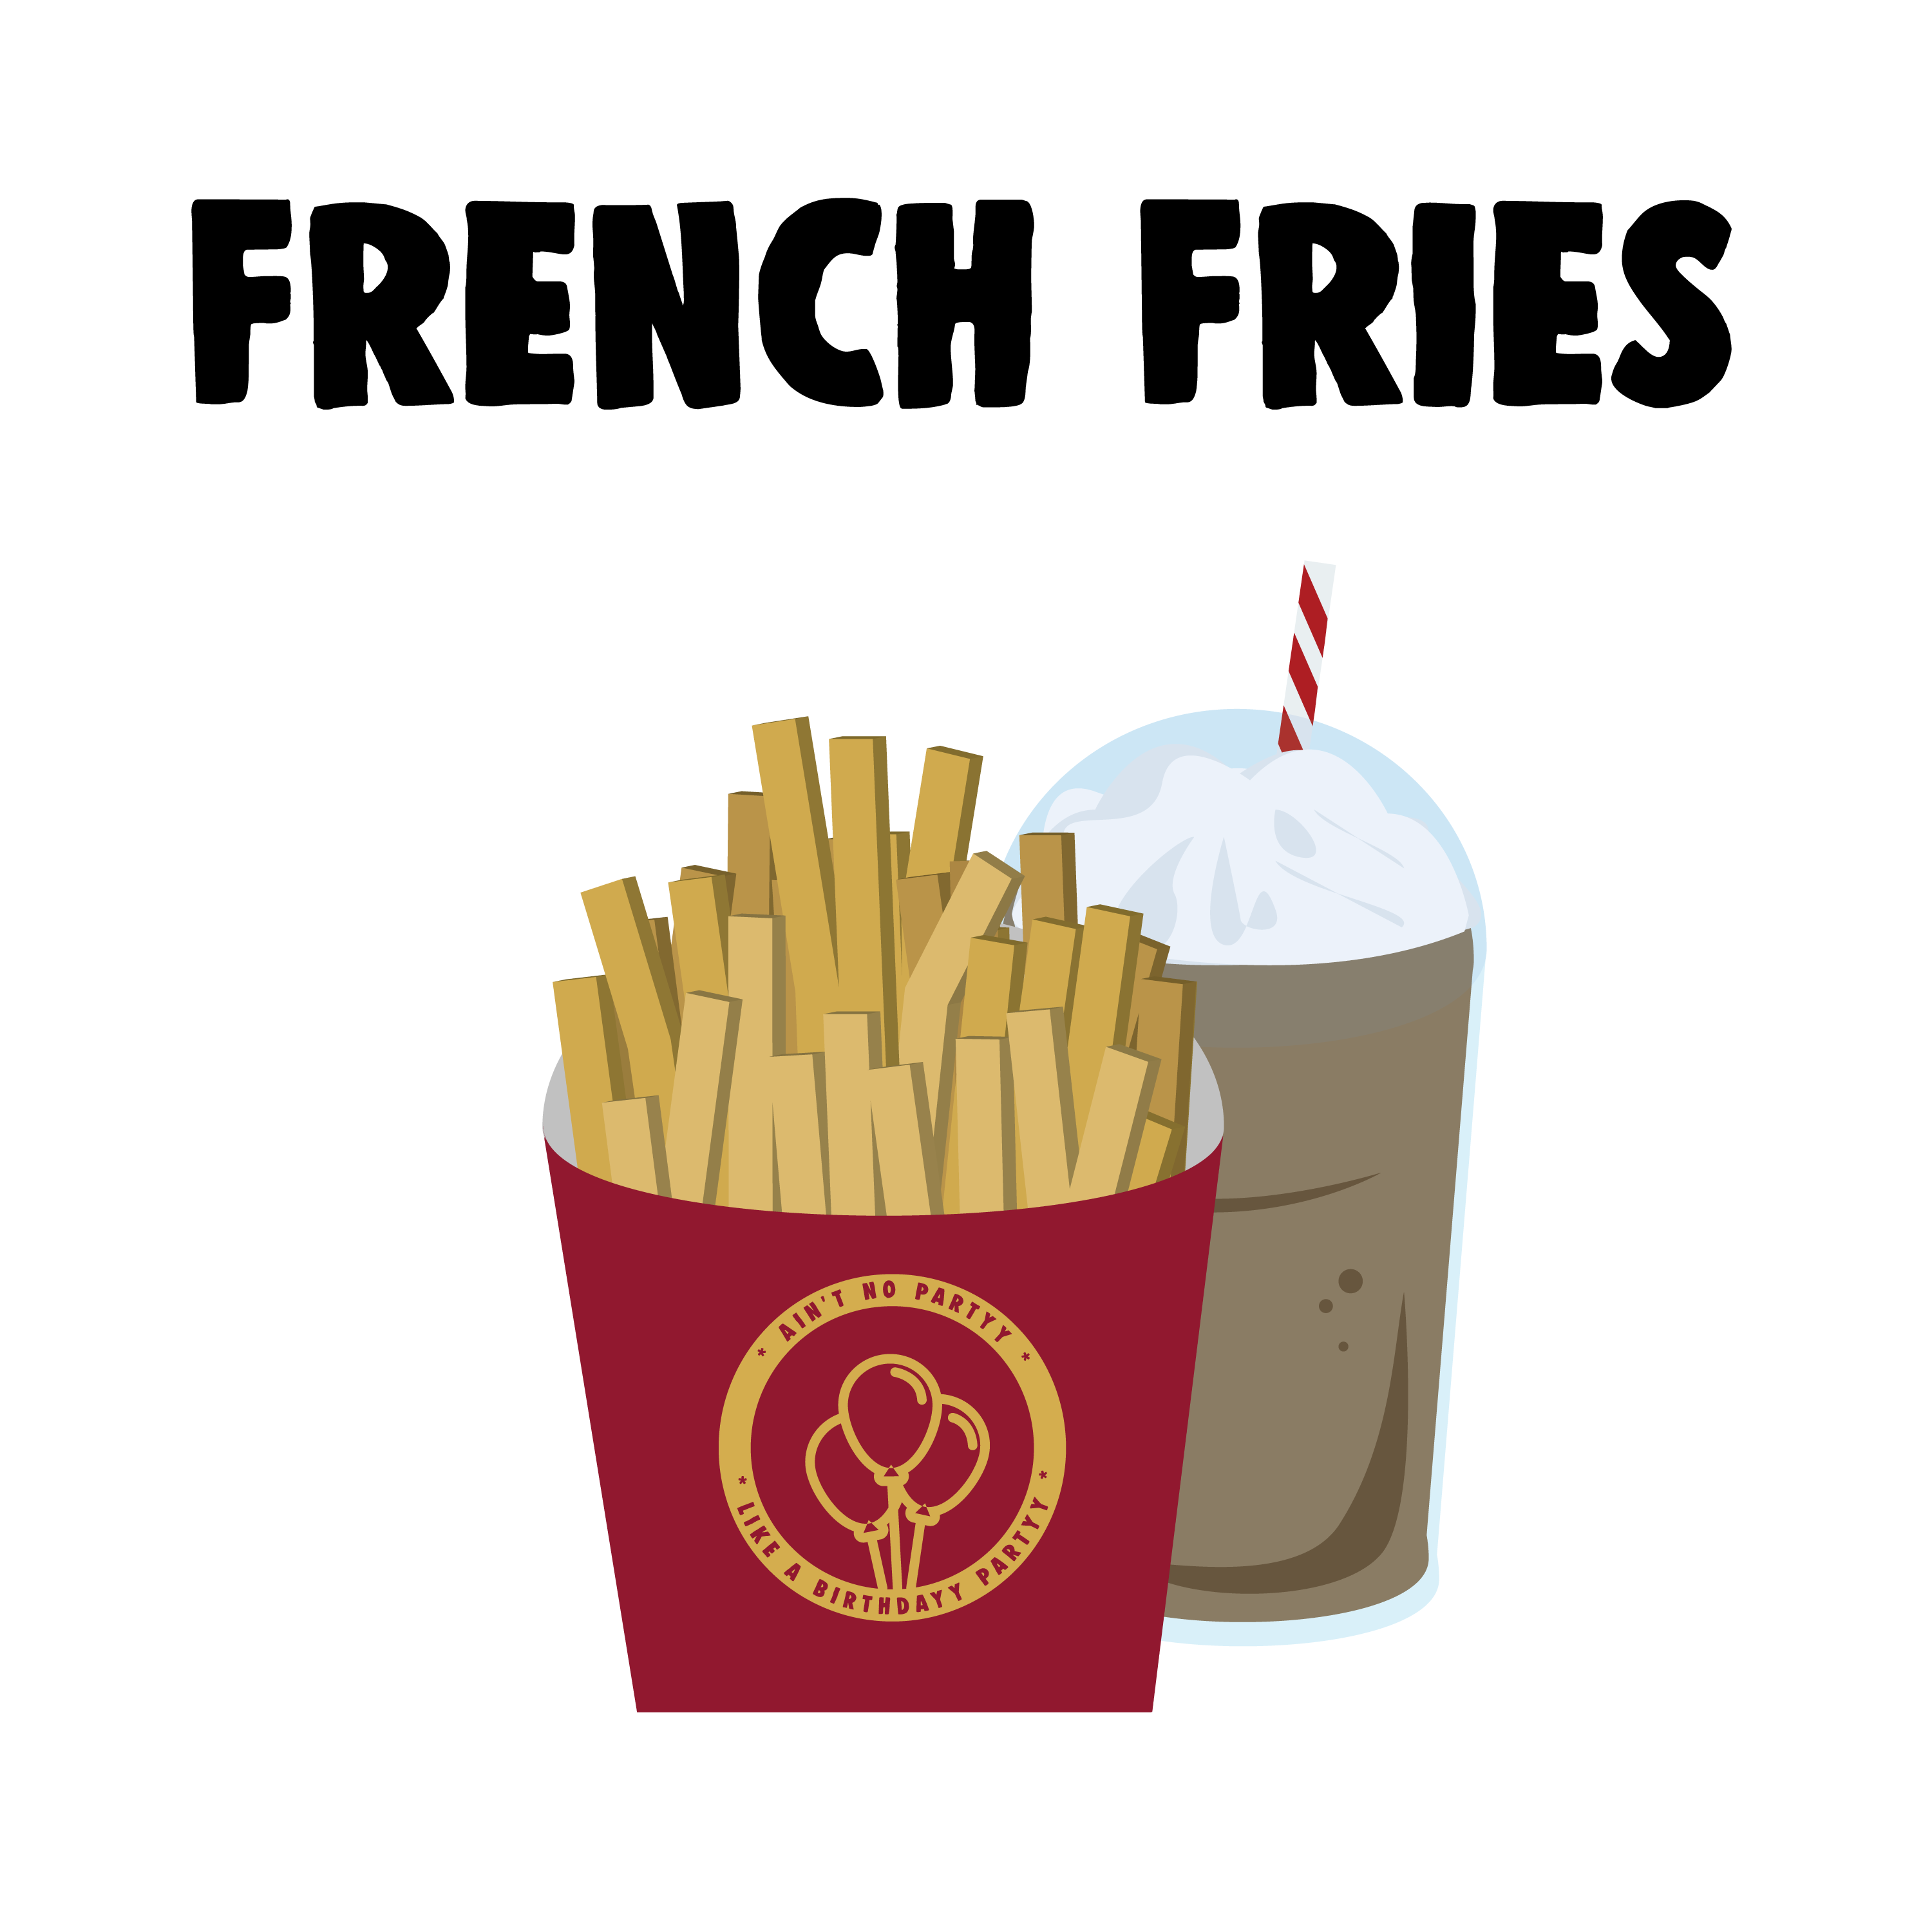 Birthdayy Partyy Release Unique End-of-Summer Original, “French Fries”